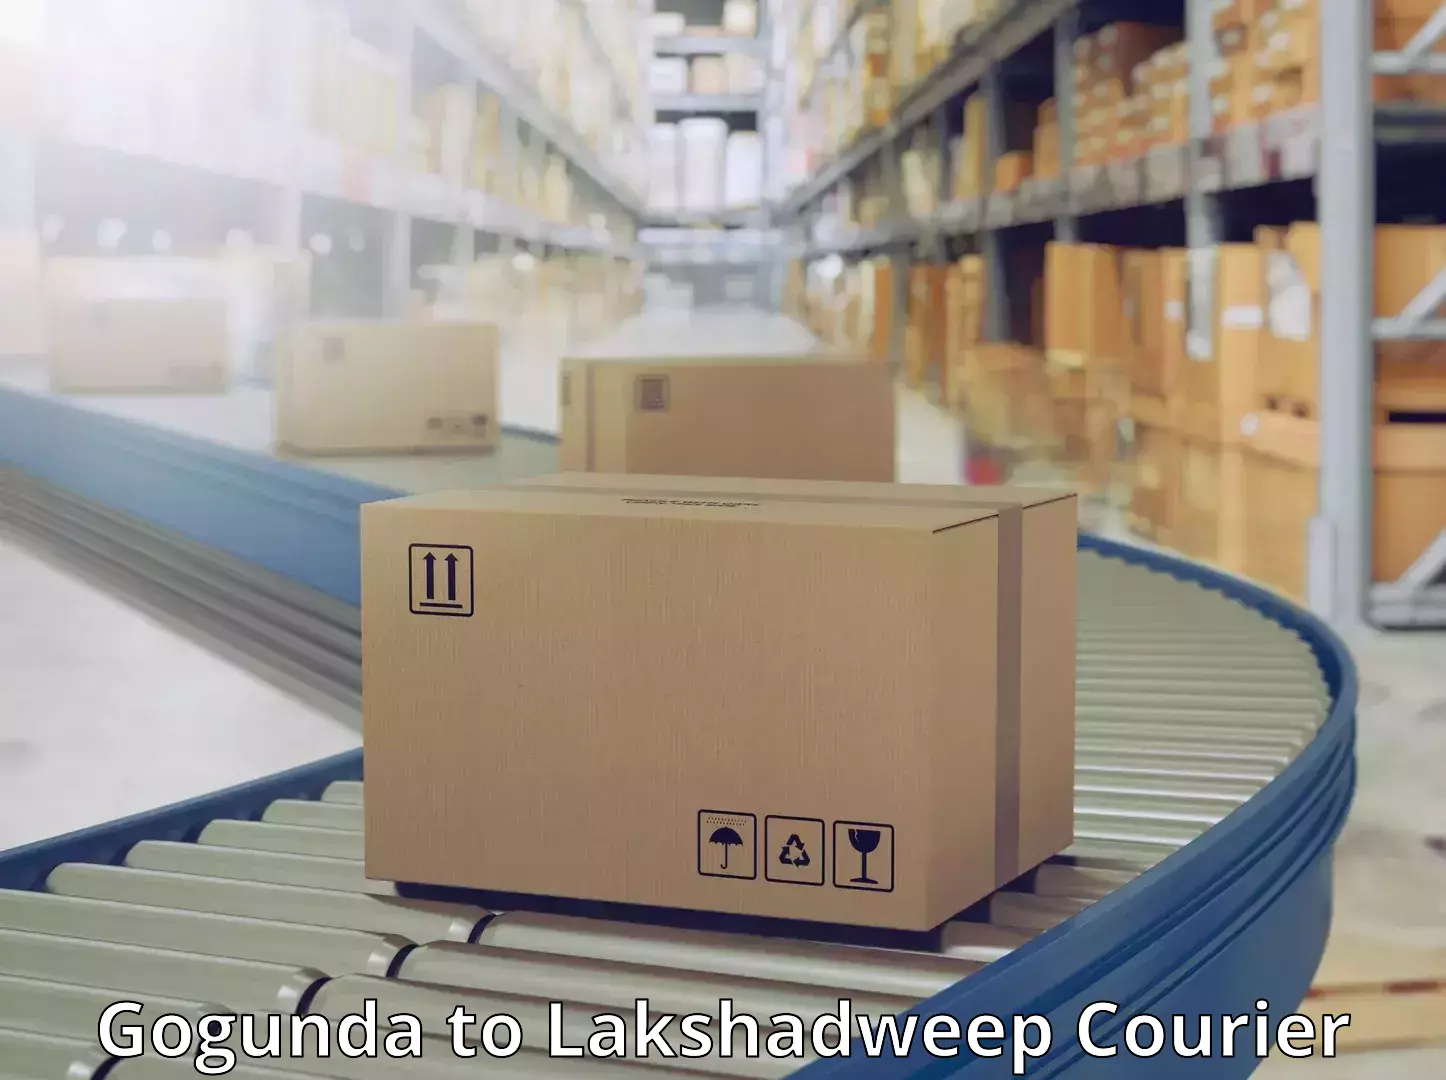 Efficient courier operations Gogunda to Lakshadweep